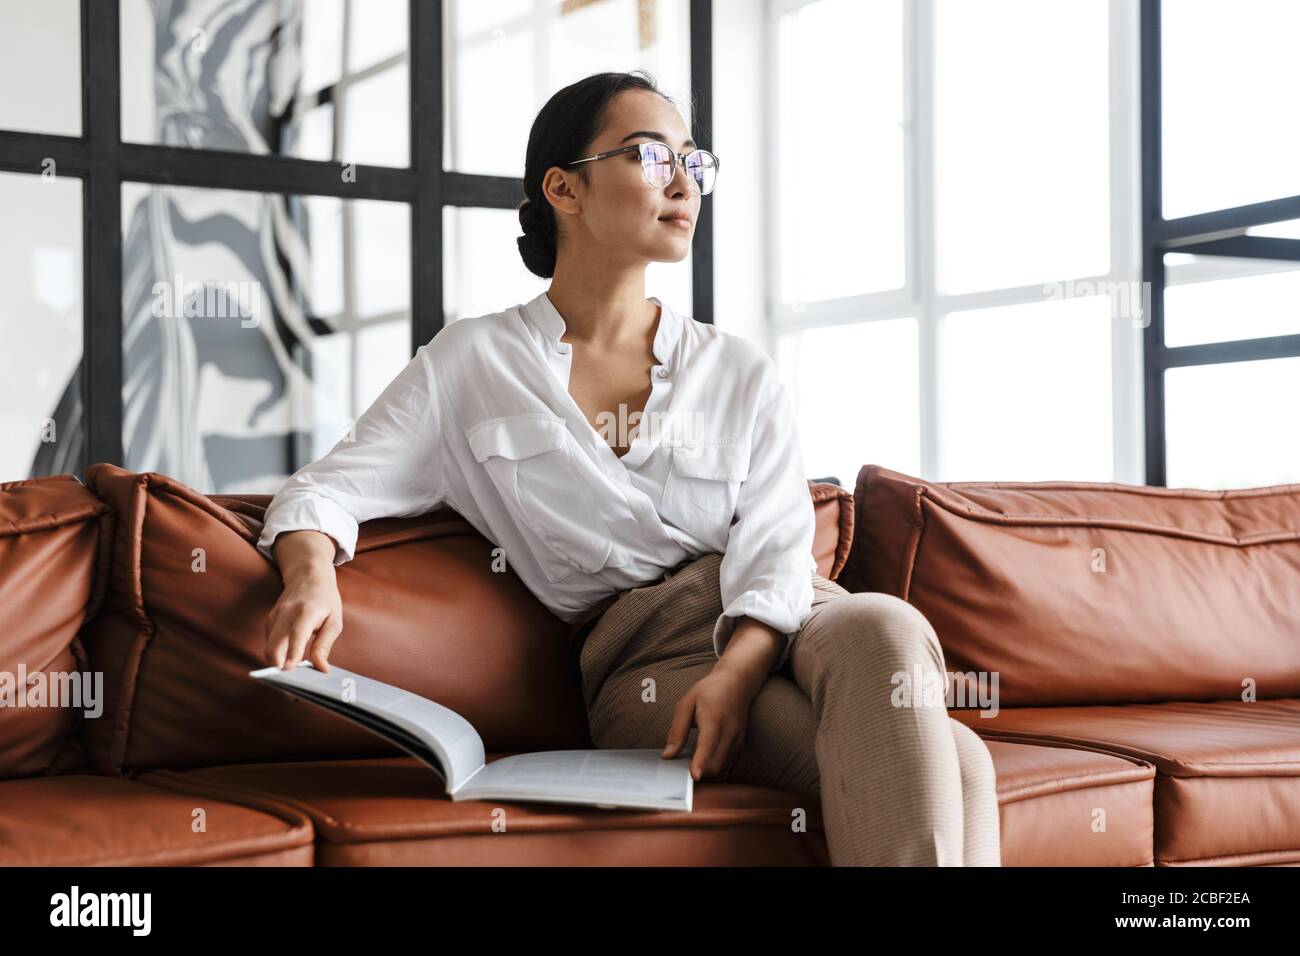 Attractive smiling young asian business woman relaxing on a leather couch at home, reading a magazine Stock Photo